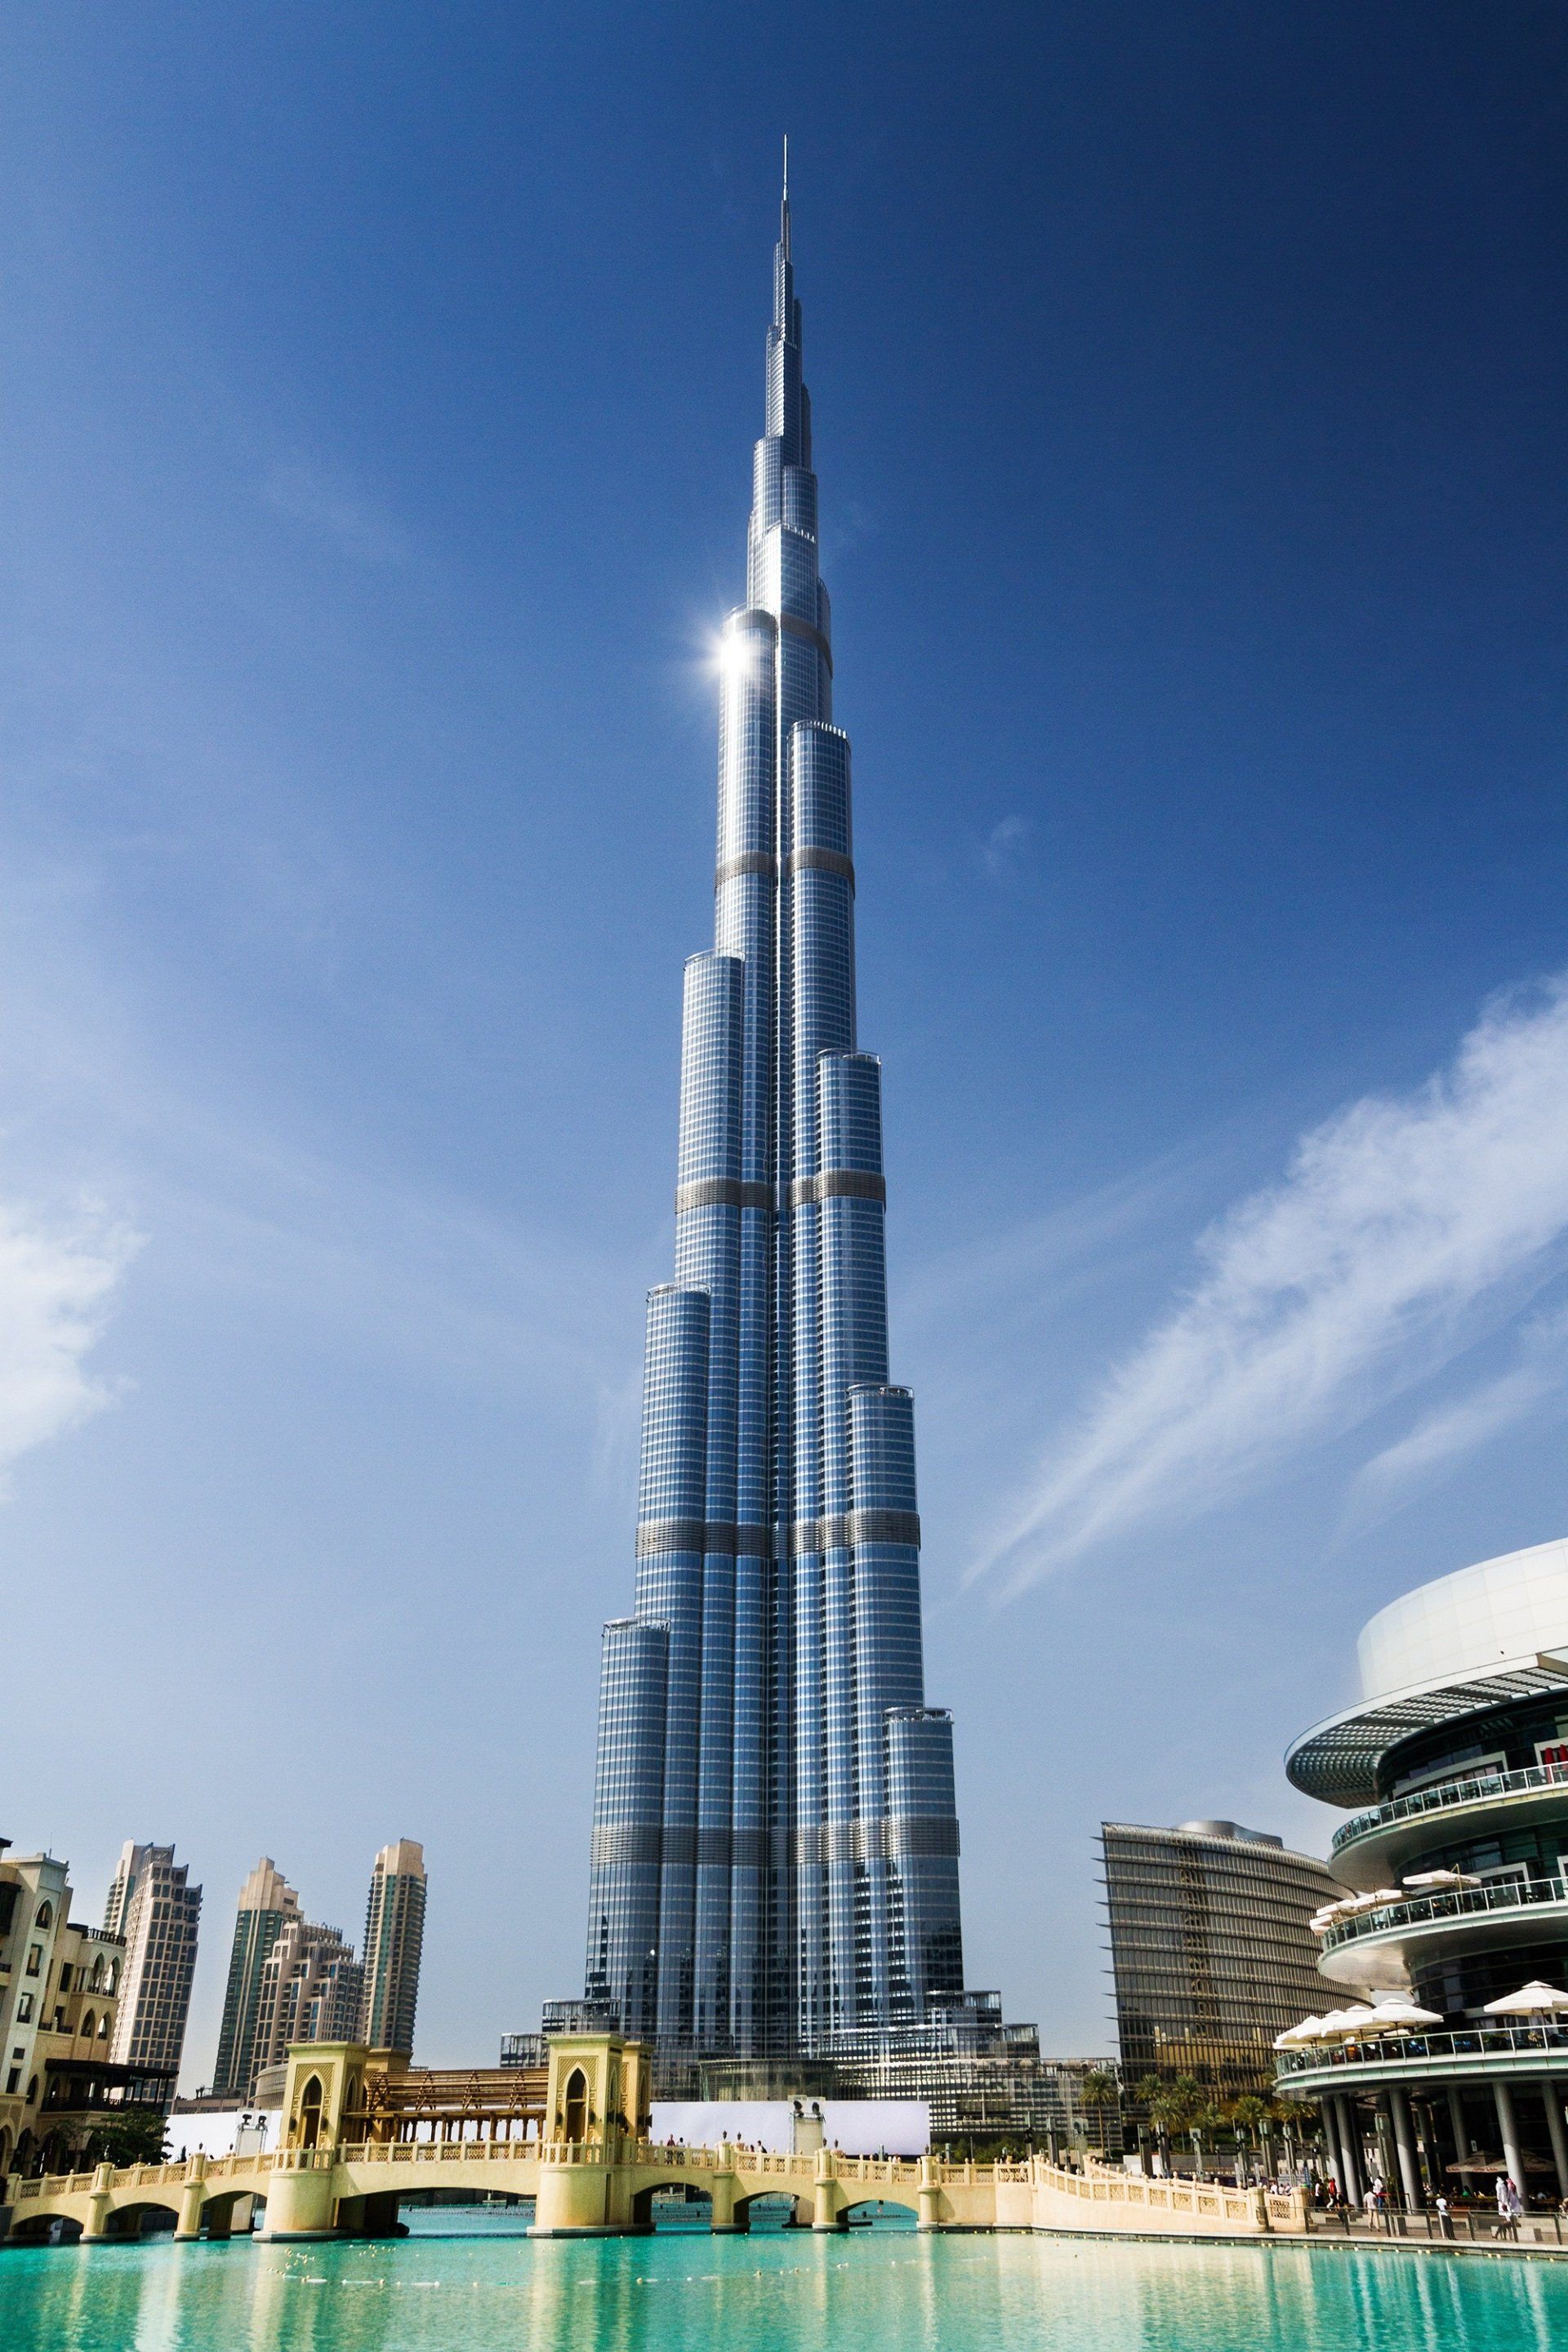 The burj khalifa is the tallest building in the world